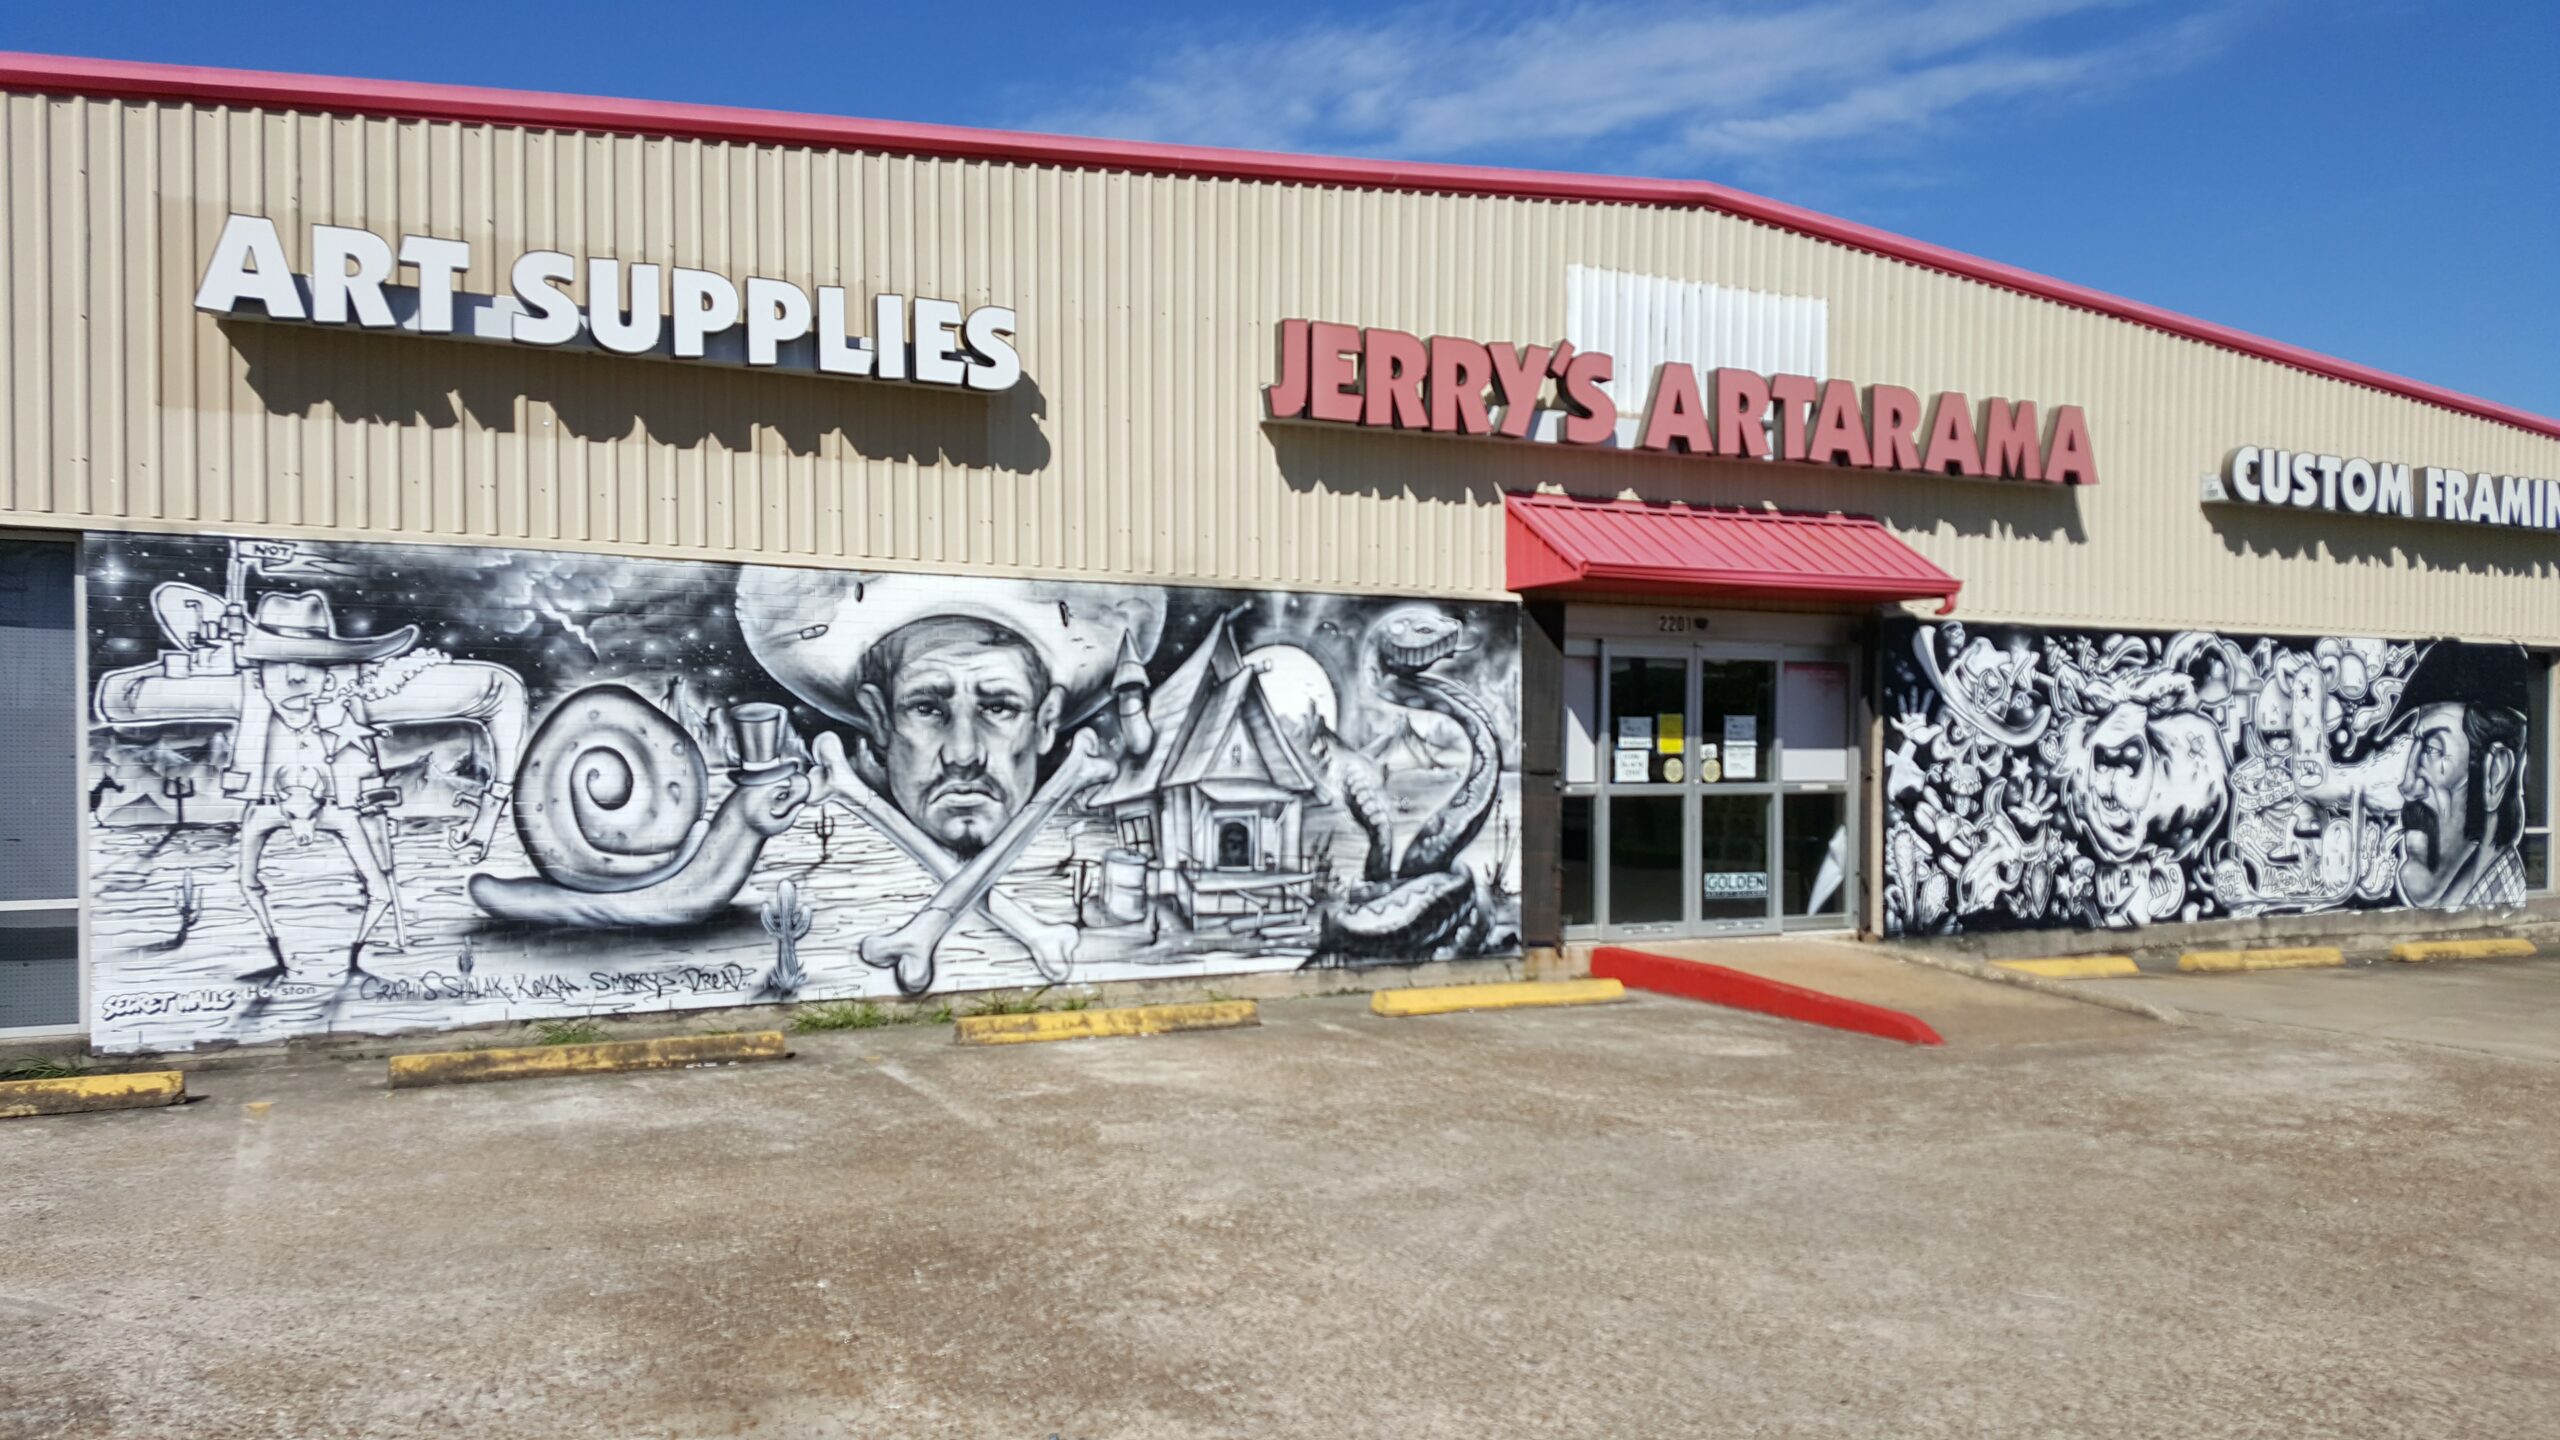 Where to Buy Art Supplies in Houston